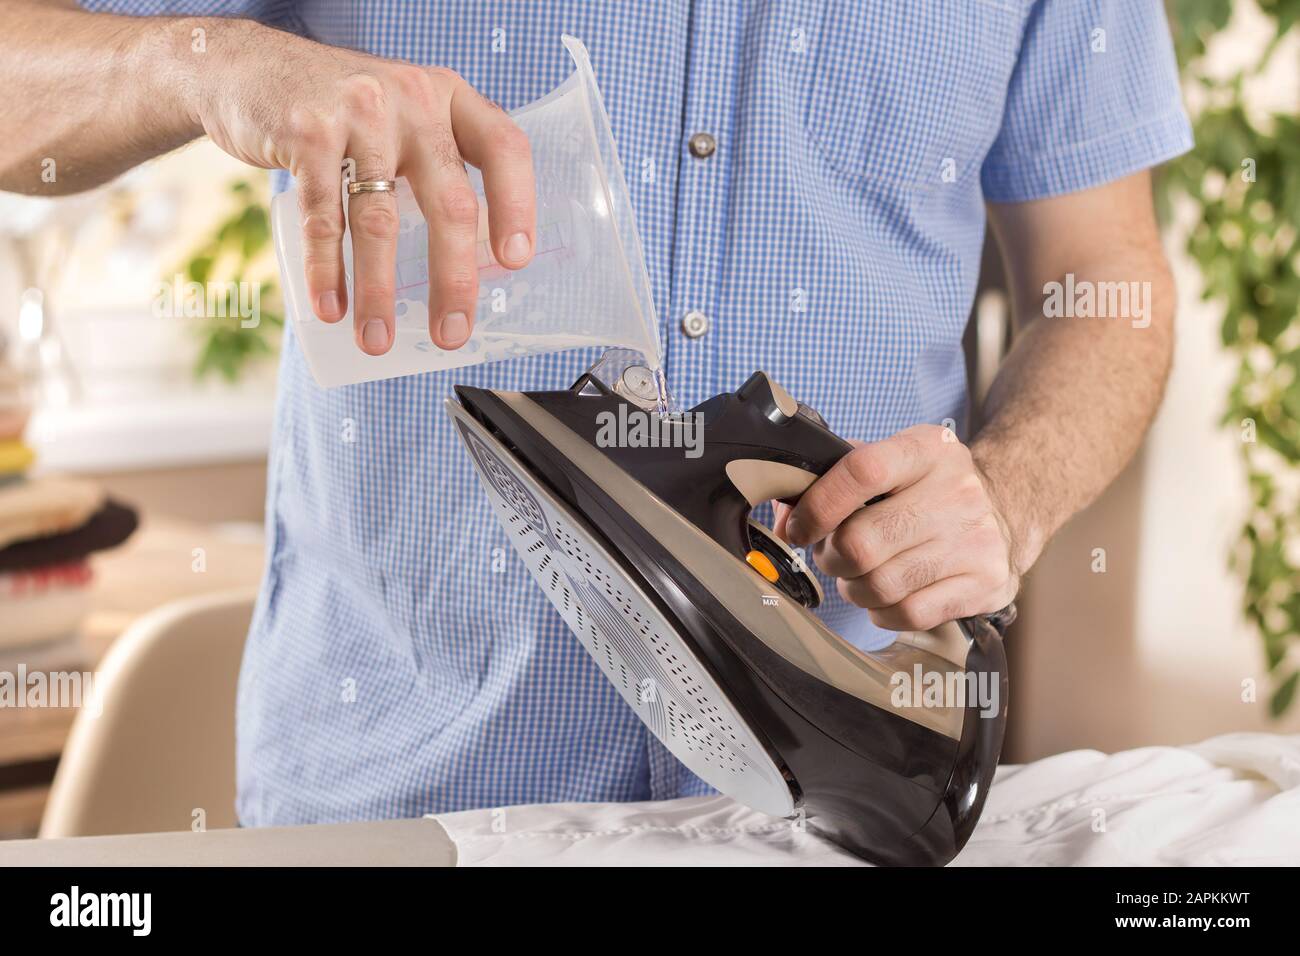 Man in household duties. Ironing clothes. The man holds the iron in one  hand and in the other a container with water which he pours into the iron  Stock Photo - Alamy